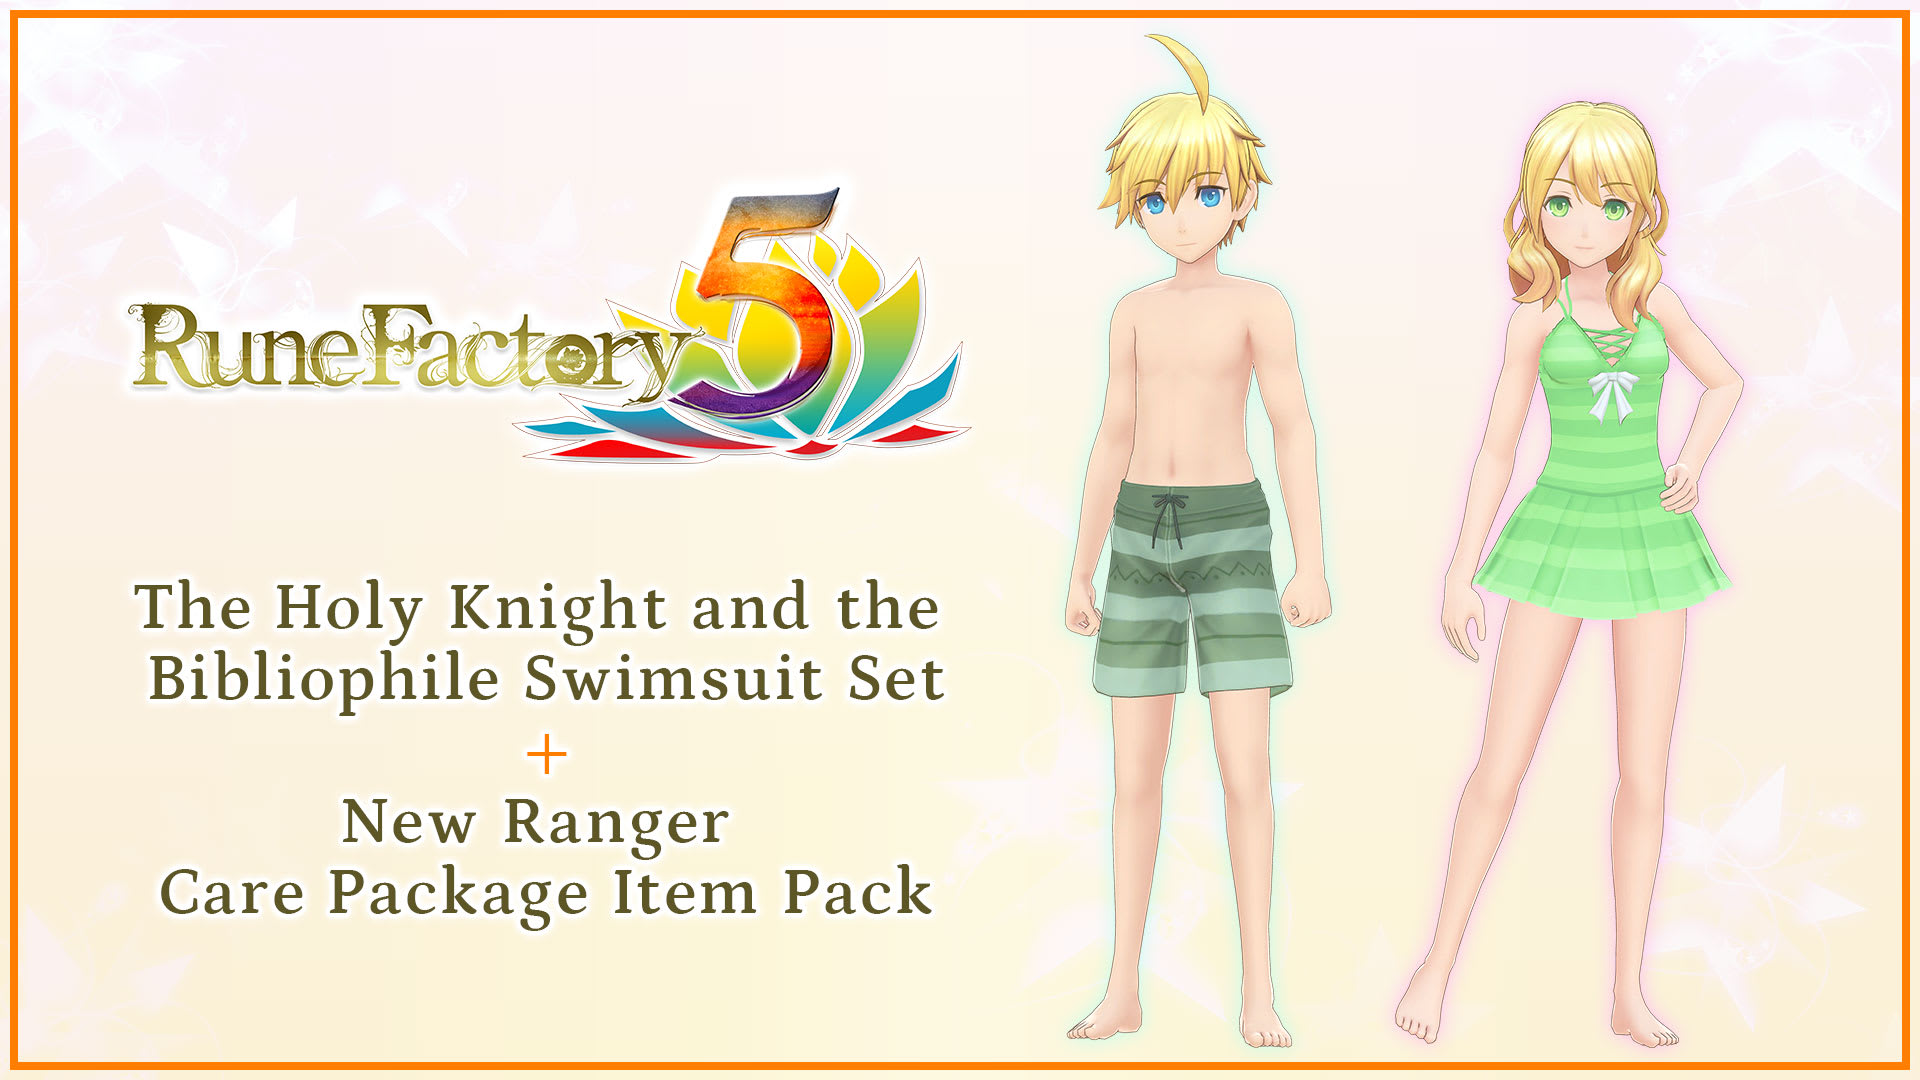 The Holy Knight and the Bibliophile Swimsuit Set + New Ranger Care Package Item Pack